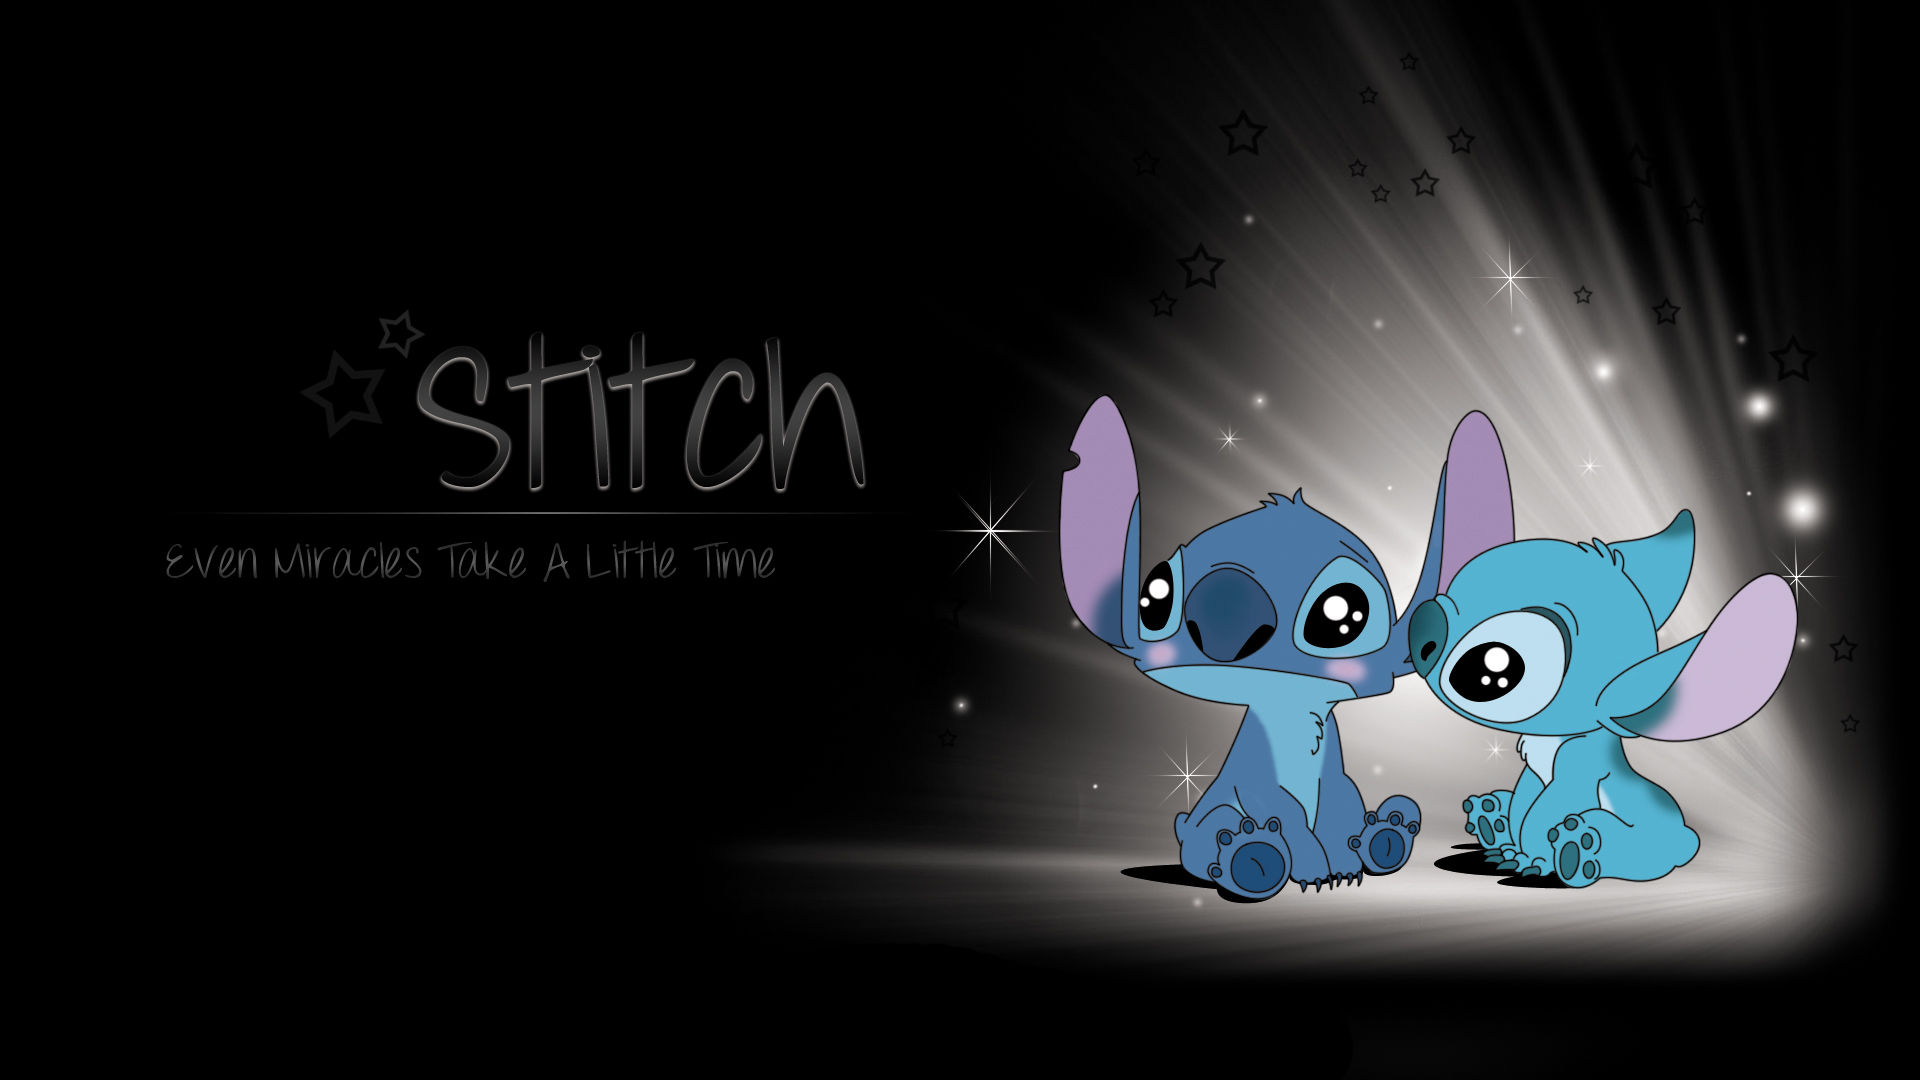 Free Stitch Backgrounds Wallpapers, Backgrounds, Images, Art Photos